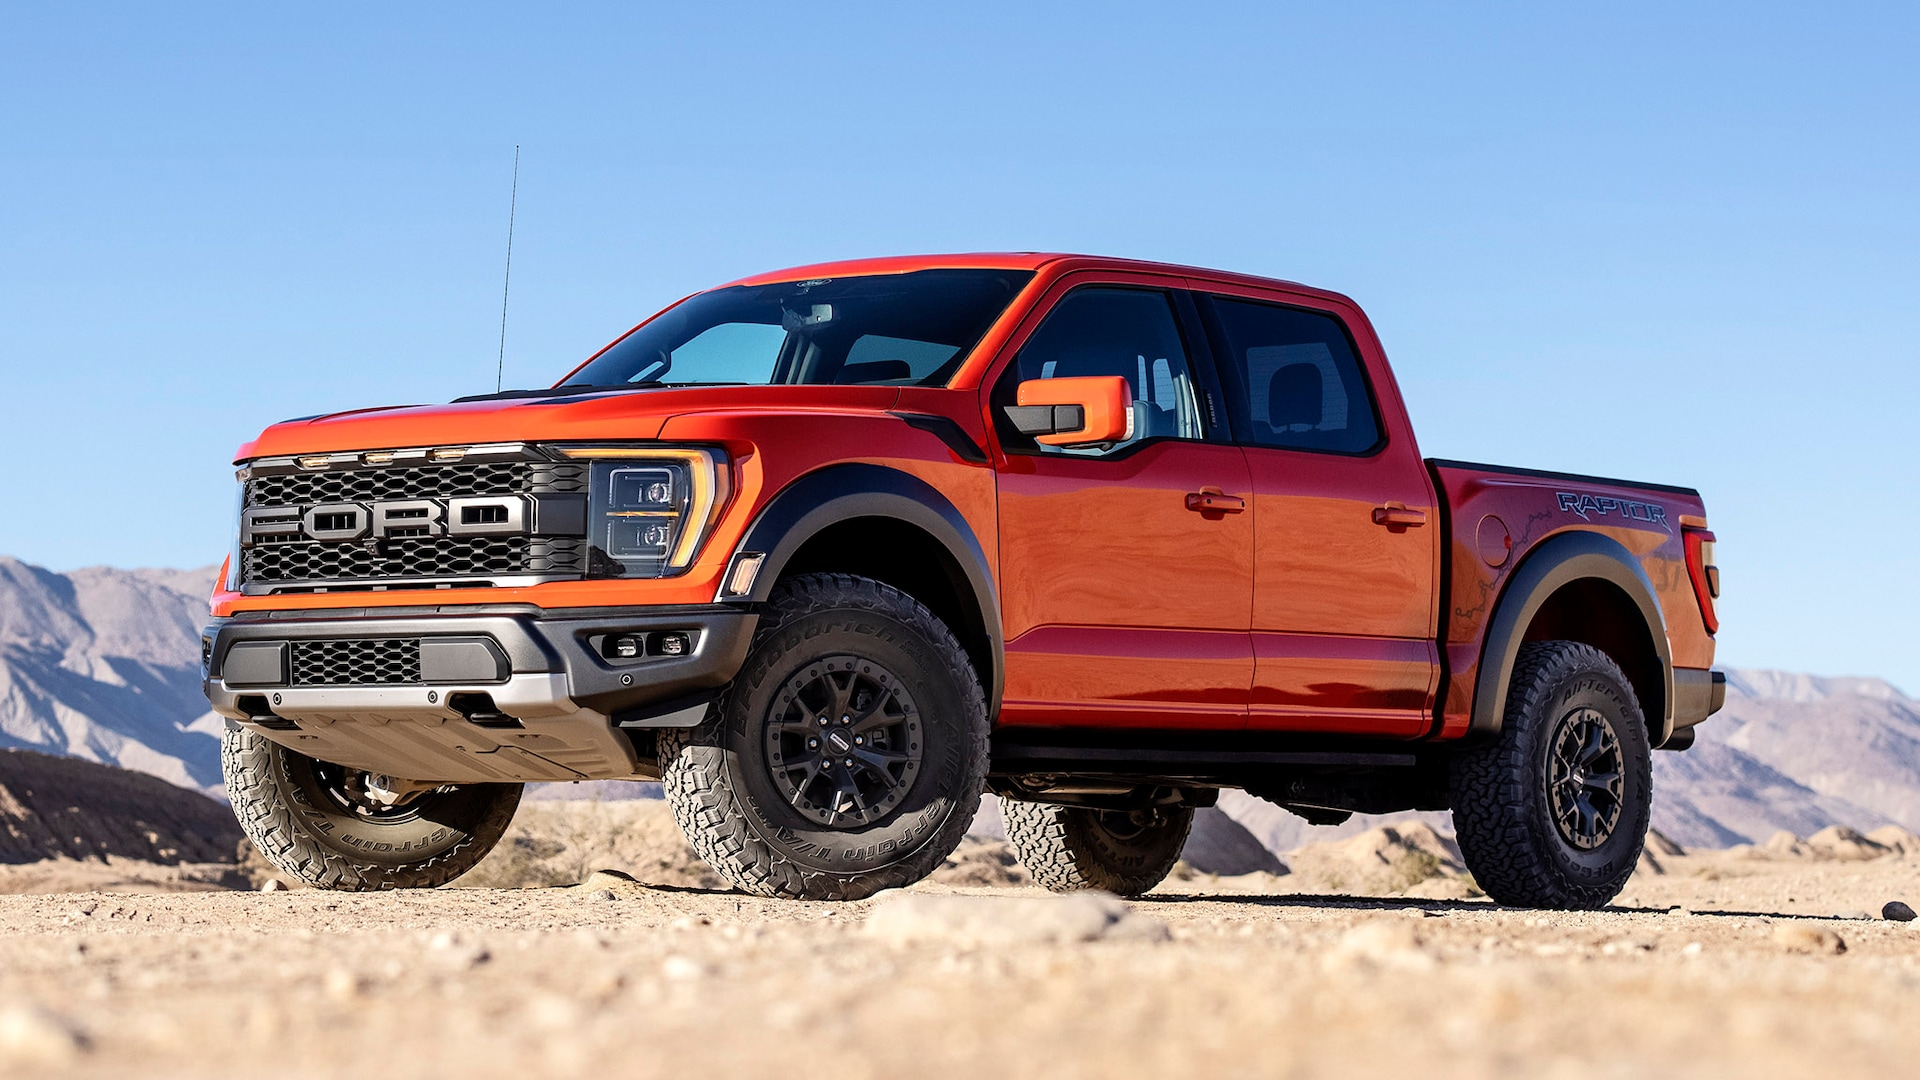 Ford F-5 Wallpapers